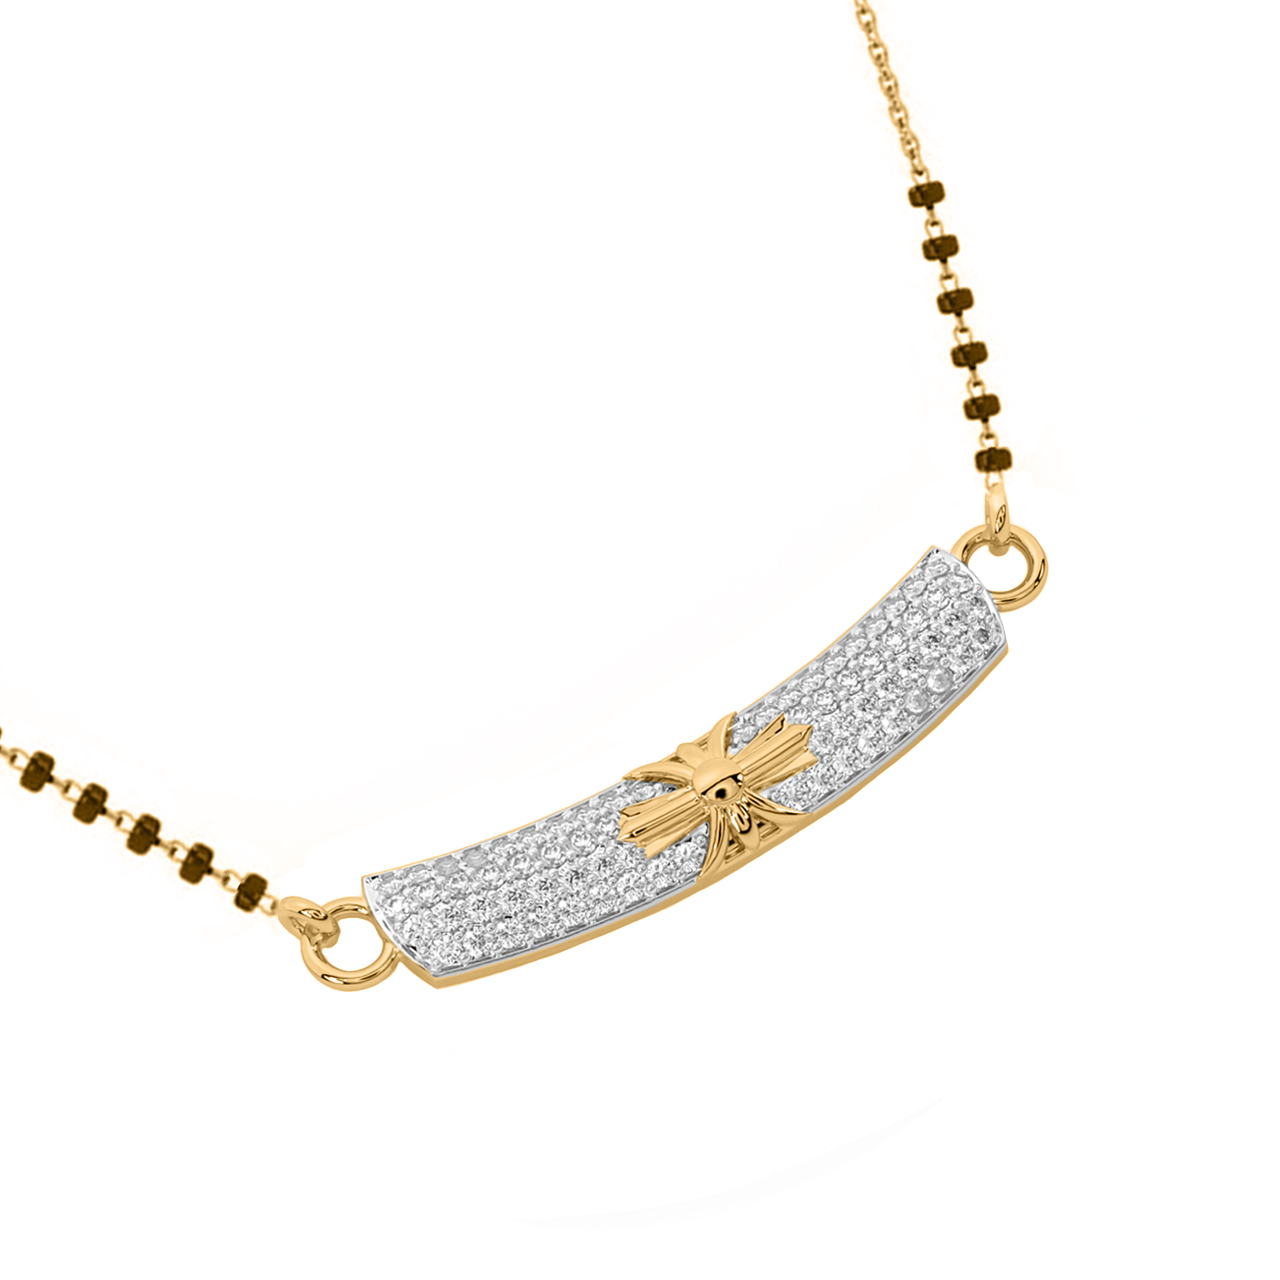 Bow Design Diamond Mangalsutra With Chain